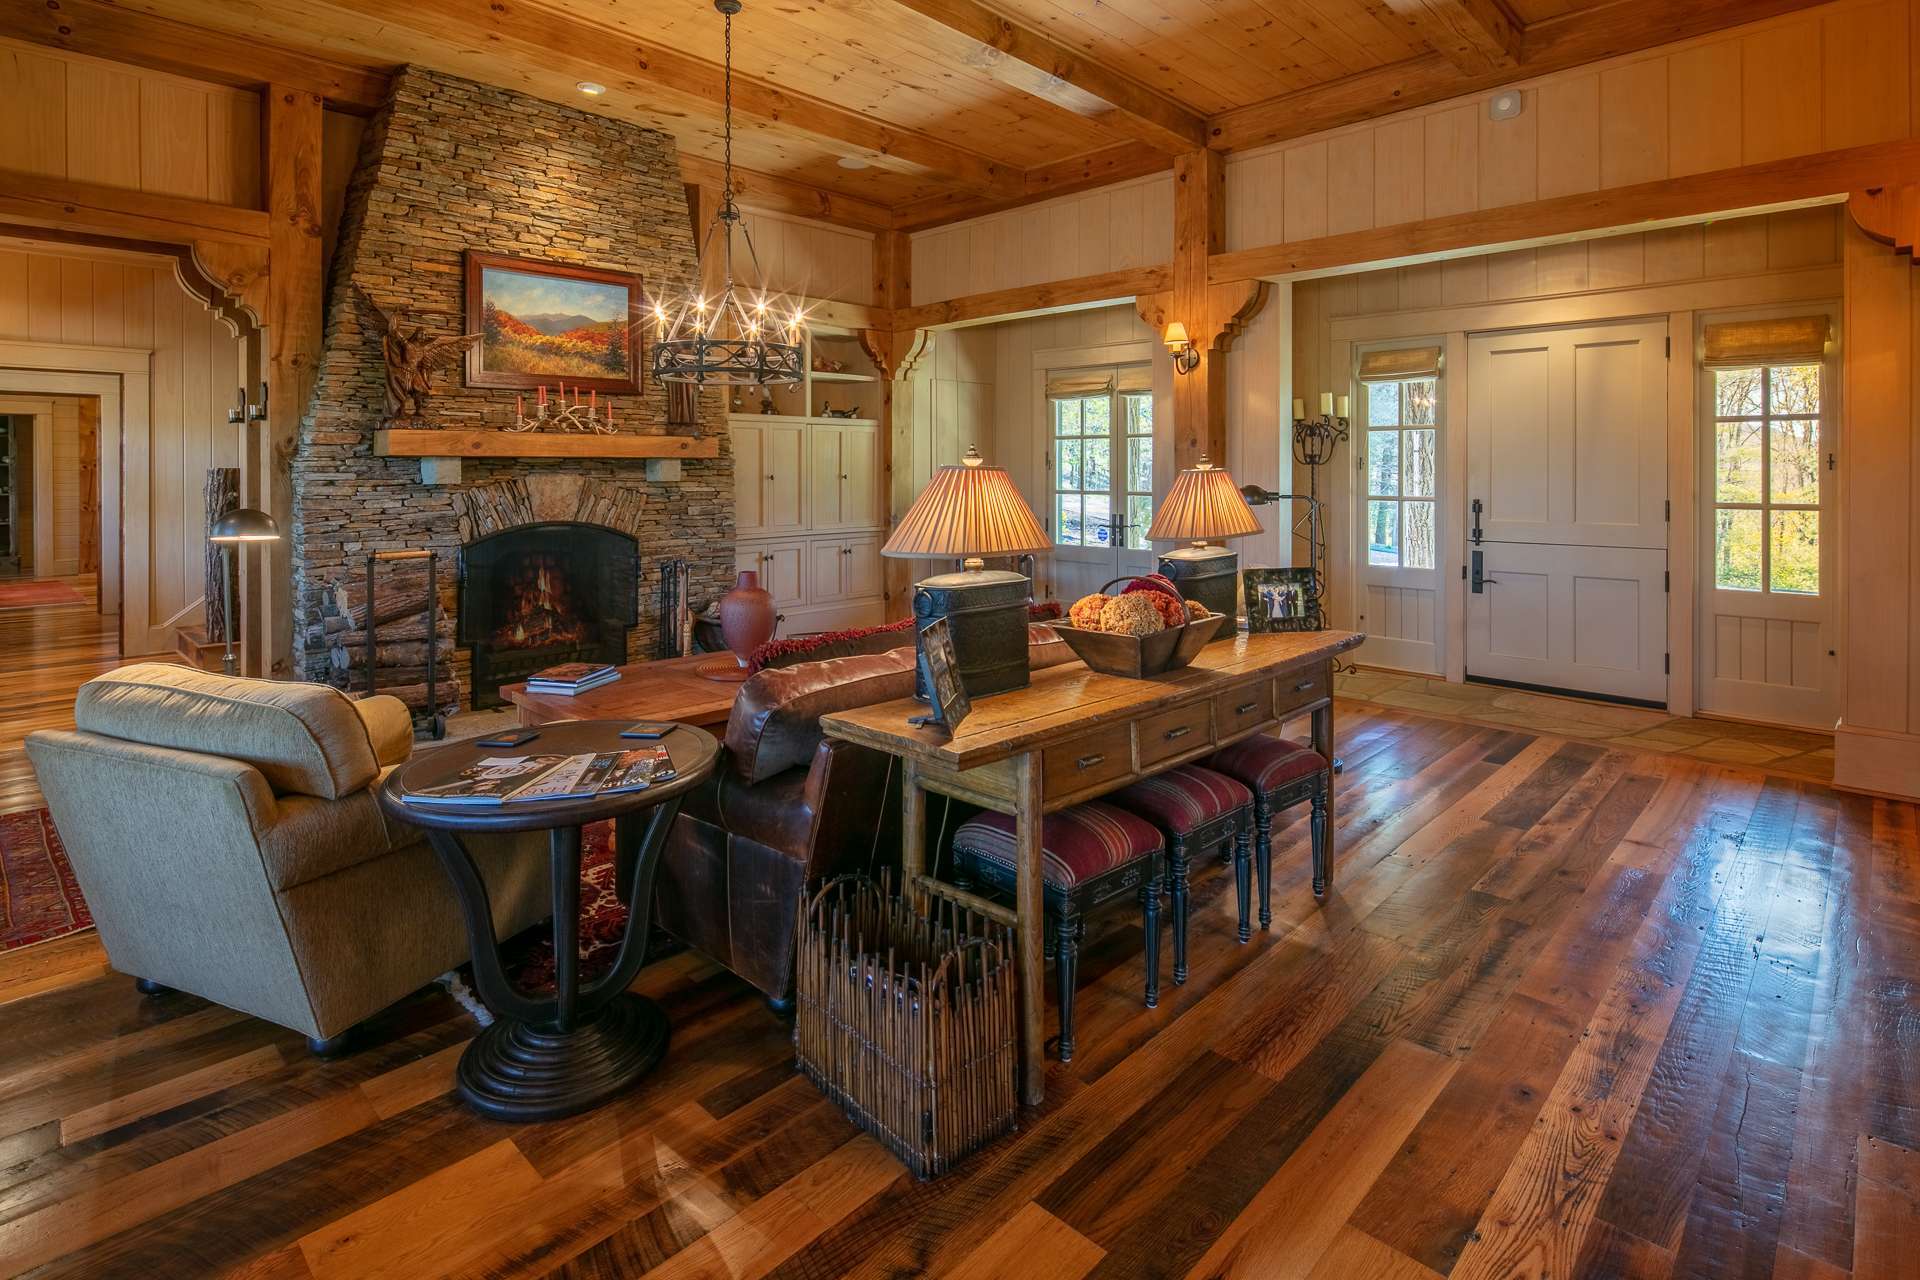 The main level boasts reclaimed wood floors and architectural beams.